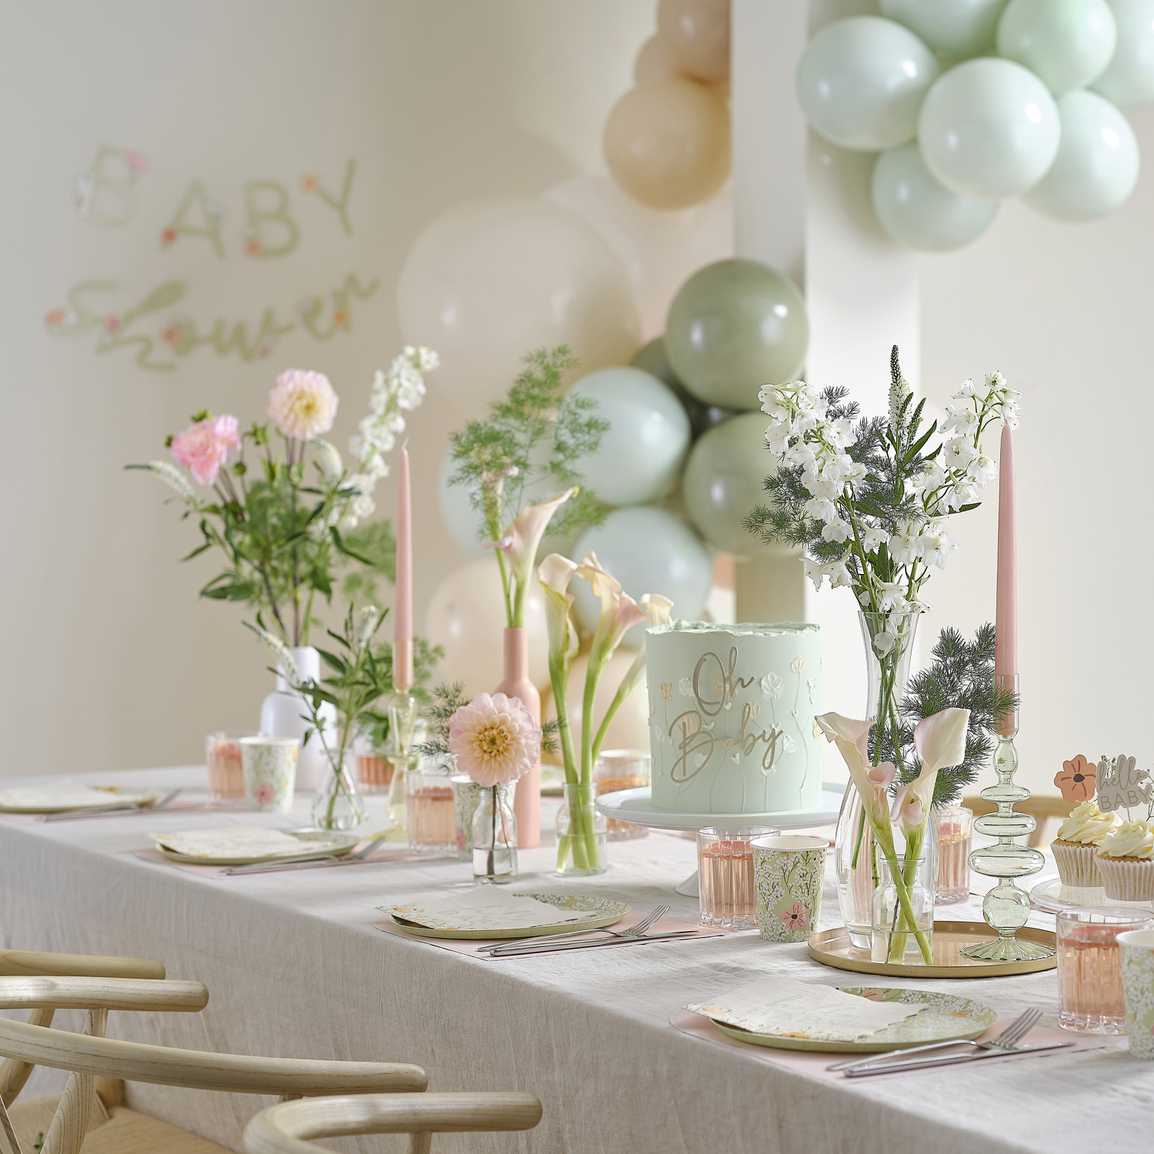 For a blooming beautiful baby shower, look no further than the Floral Baby collection of party supplies by Ginger Ray. 

l8r.it/J1VJ

#babyshower #babyshowergames #babyshowerideas #gingerray #joliefeteuk #partysupplies #babyshowersupplies #babyinbloom #floralbaby